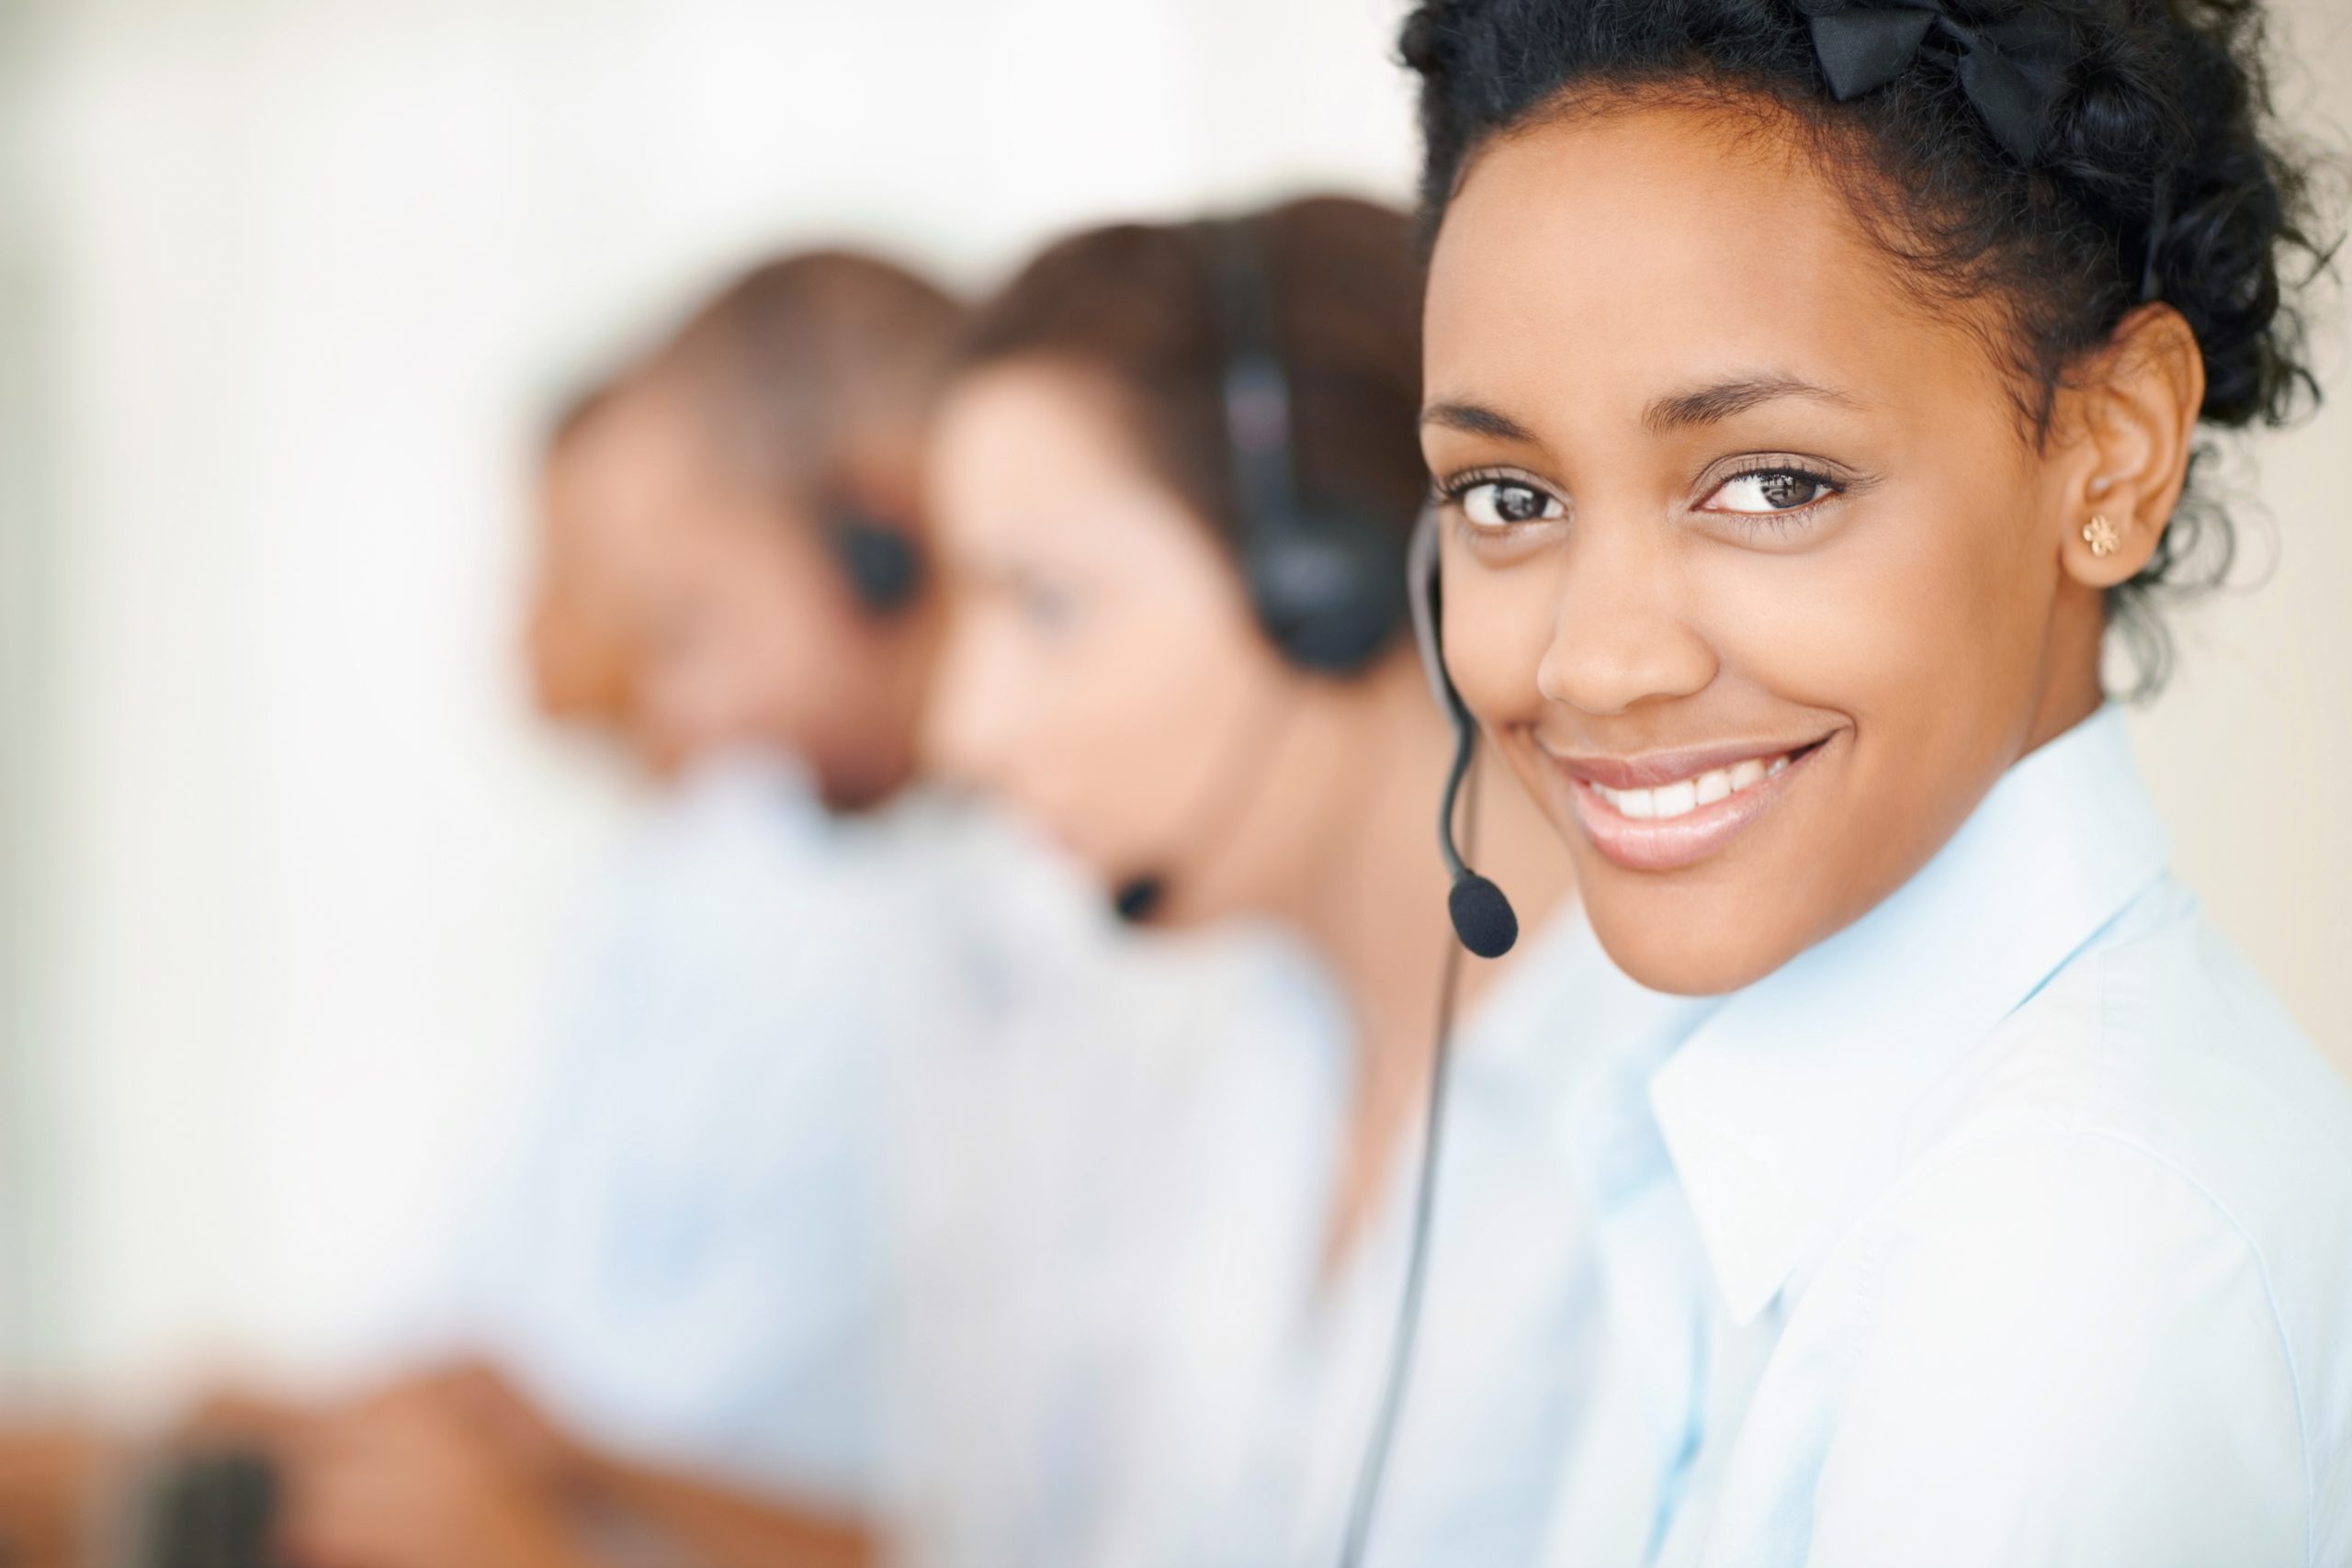 Image of smiling call center employees